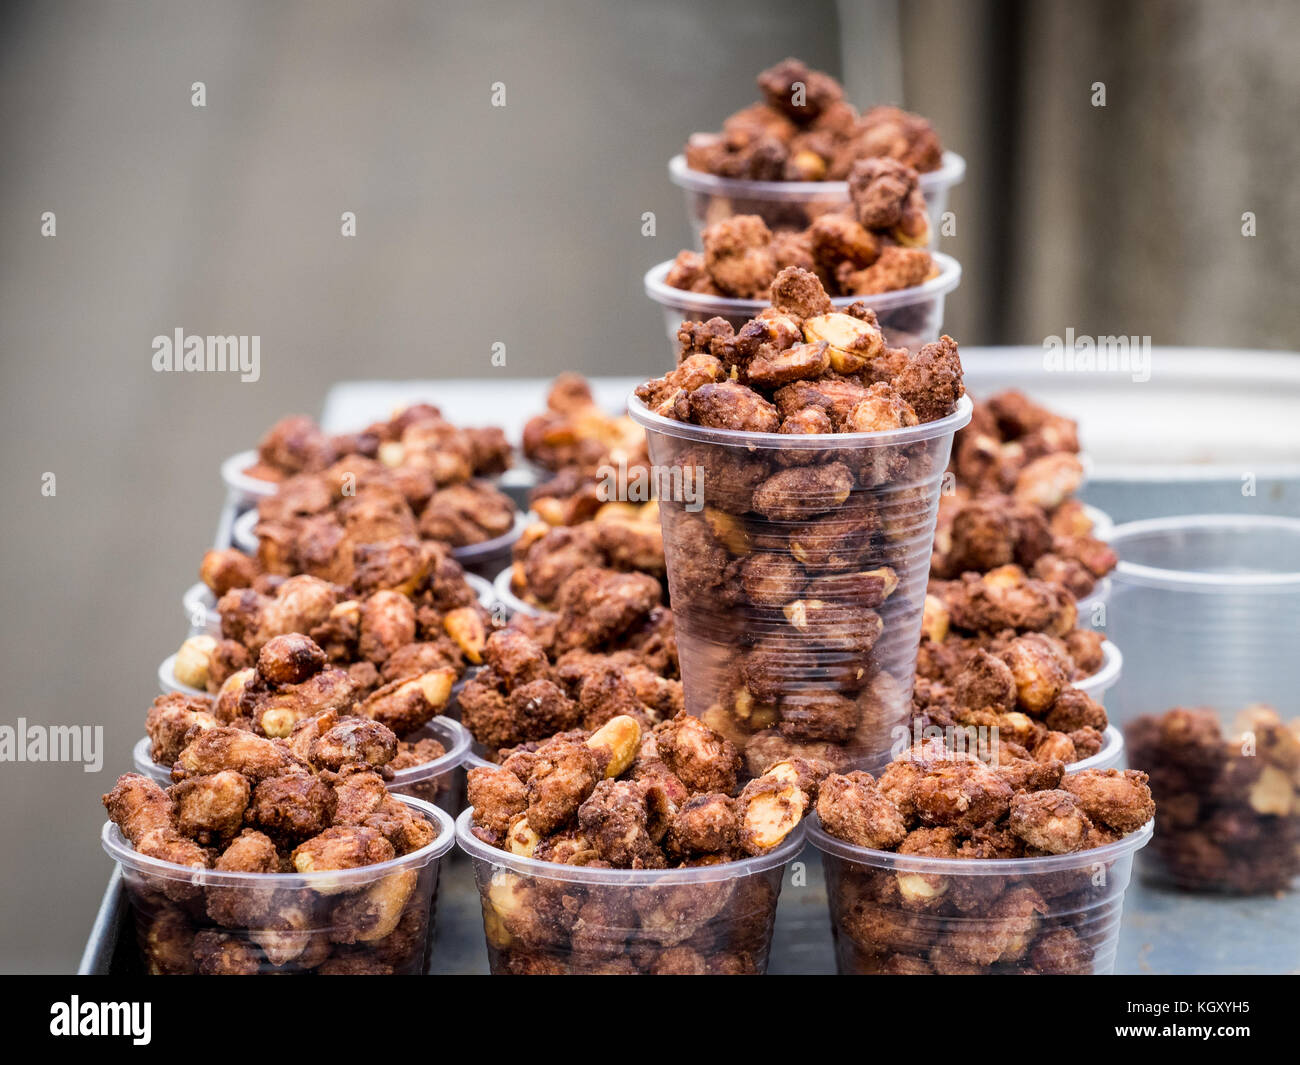 Roasted Caramel Coated Nuts Peanuts for sale from a street vendor in central London Stock Photo